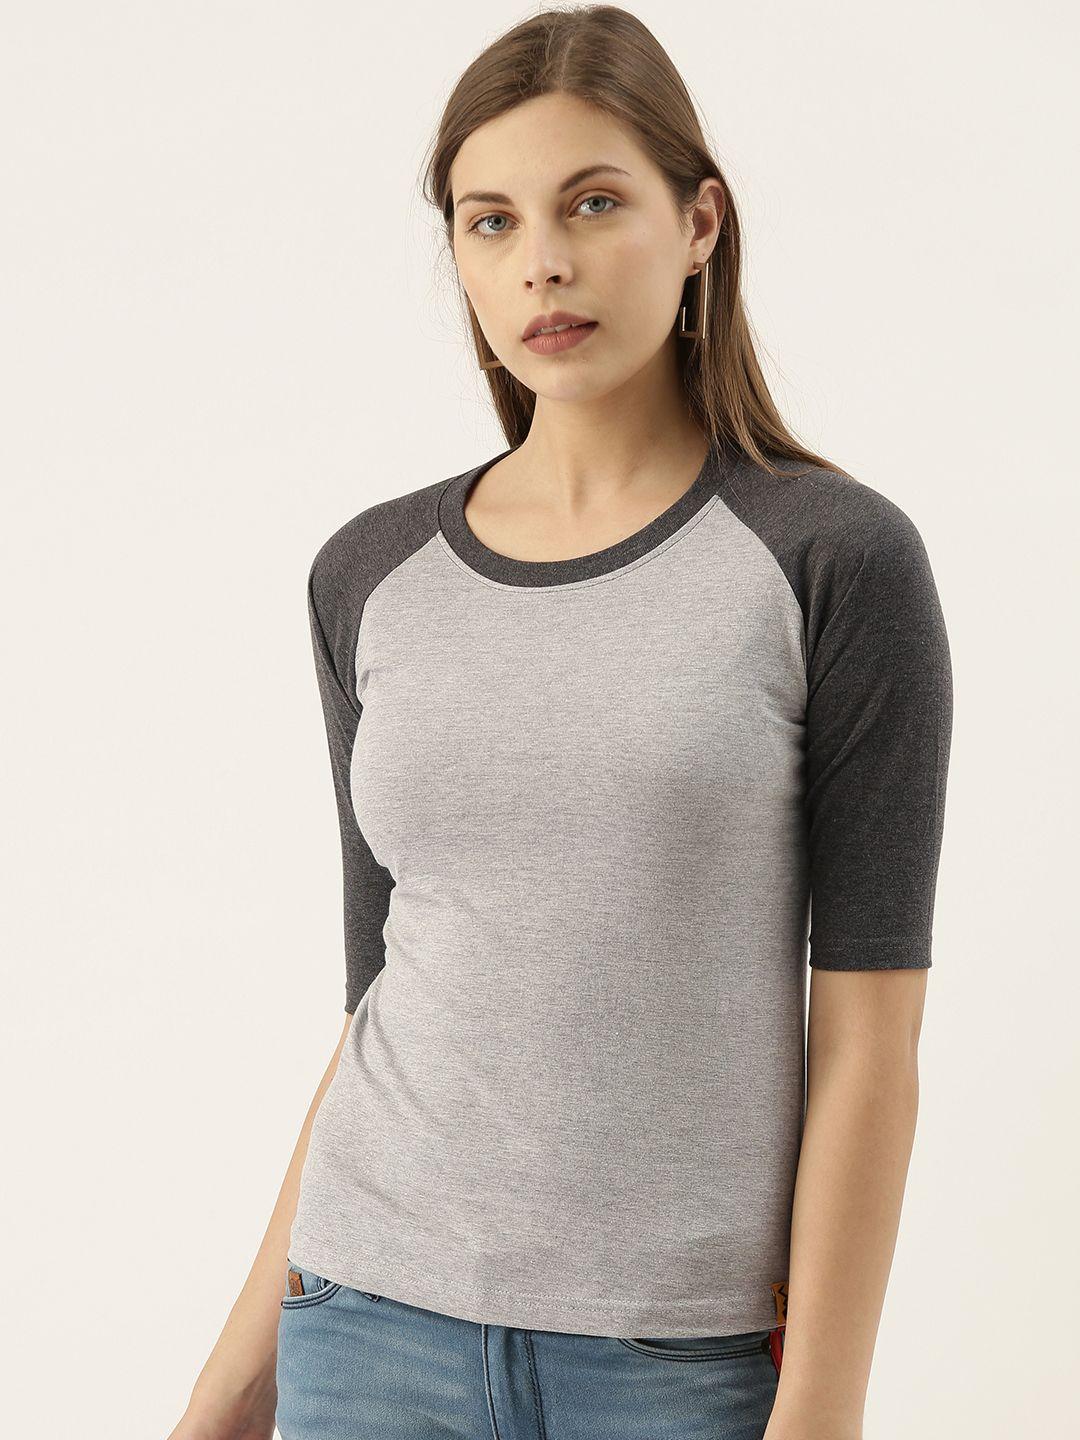 campus sutra charcoal colourblocked top